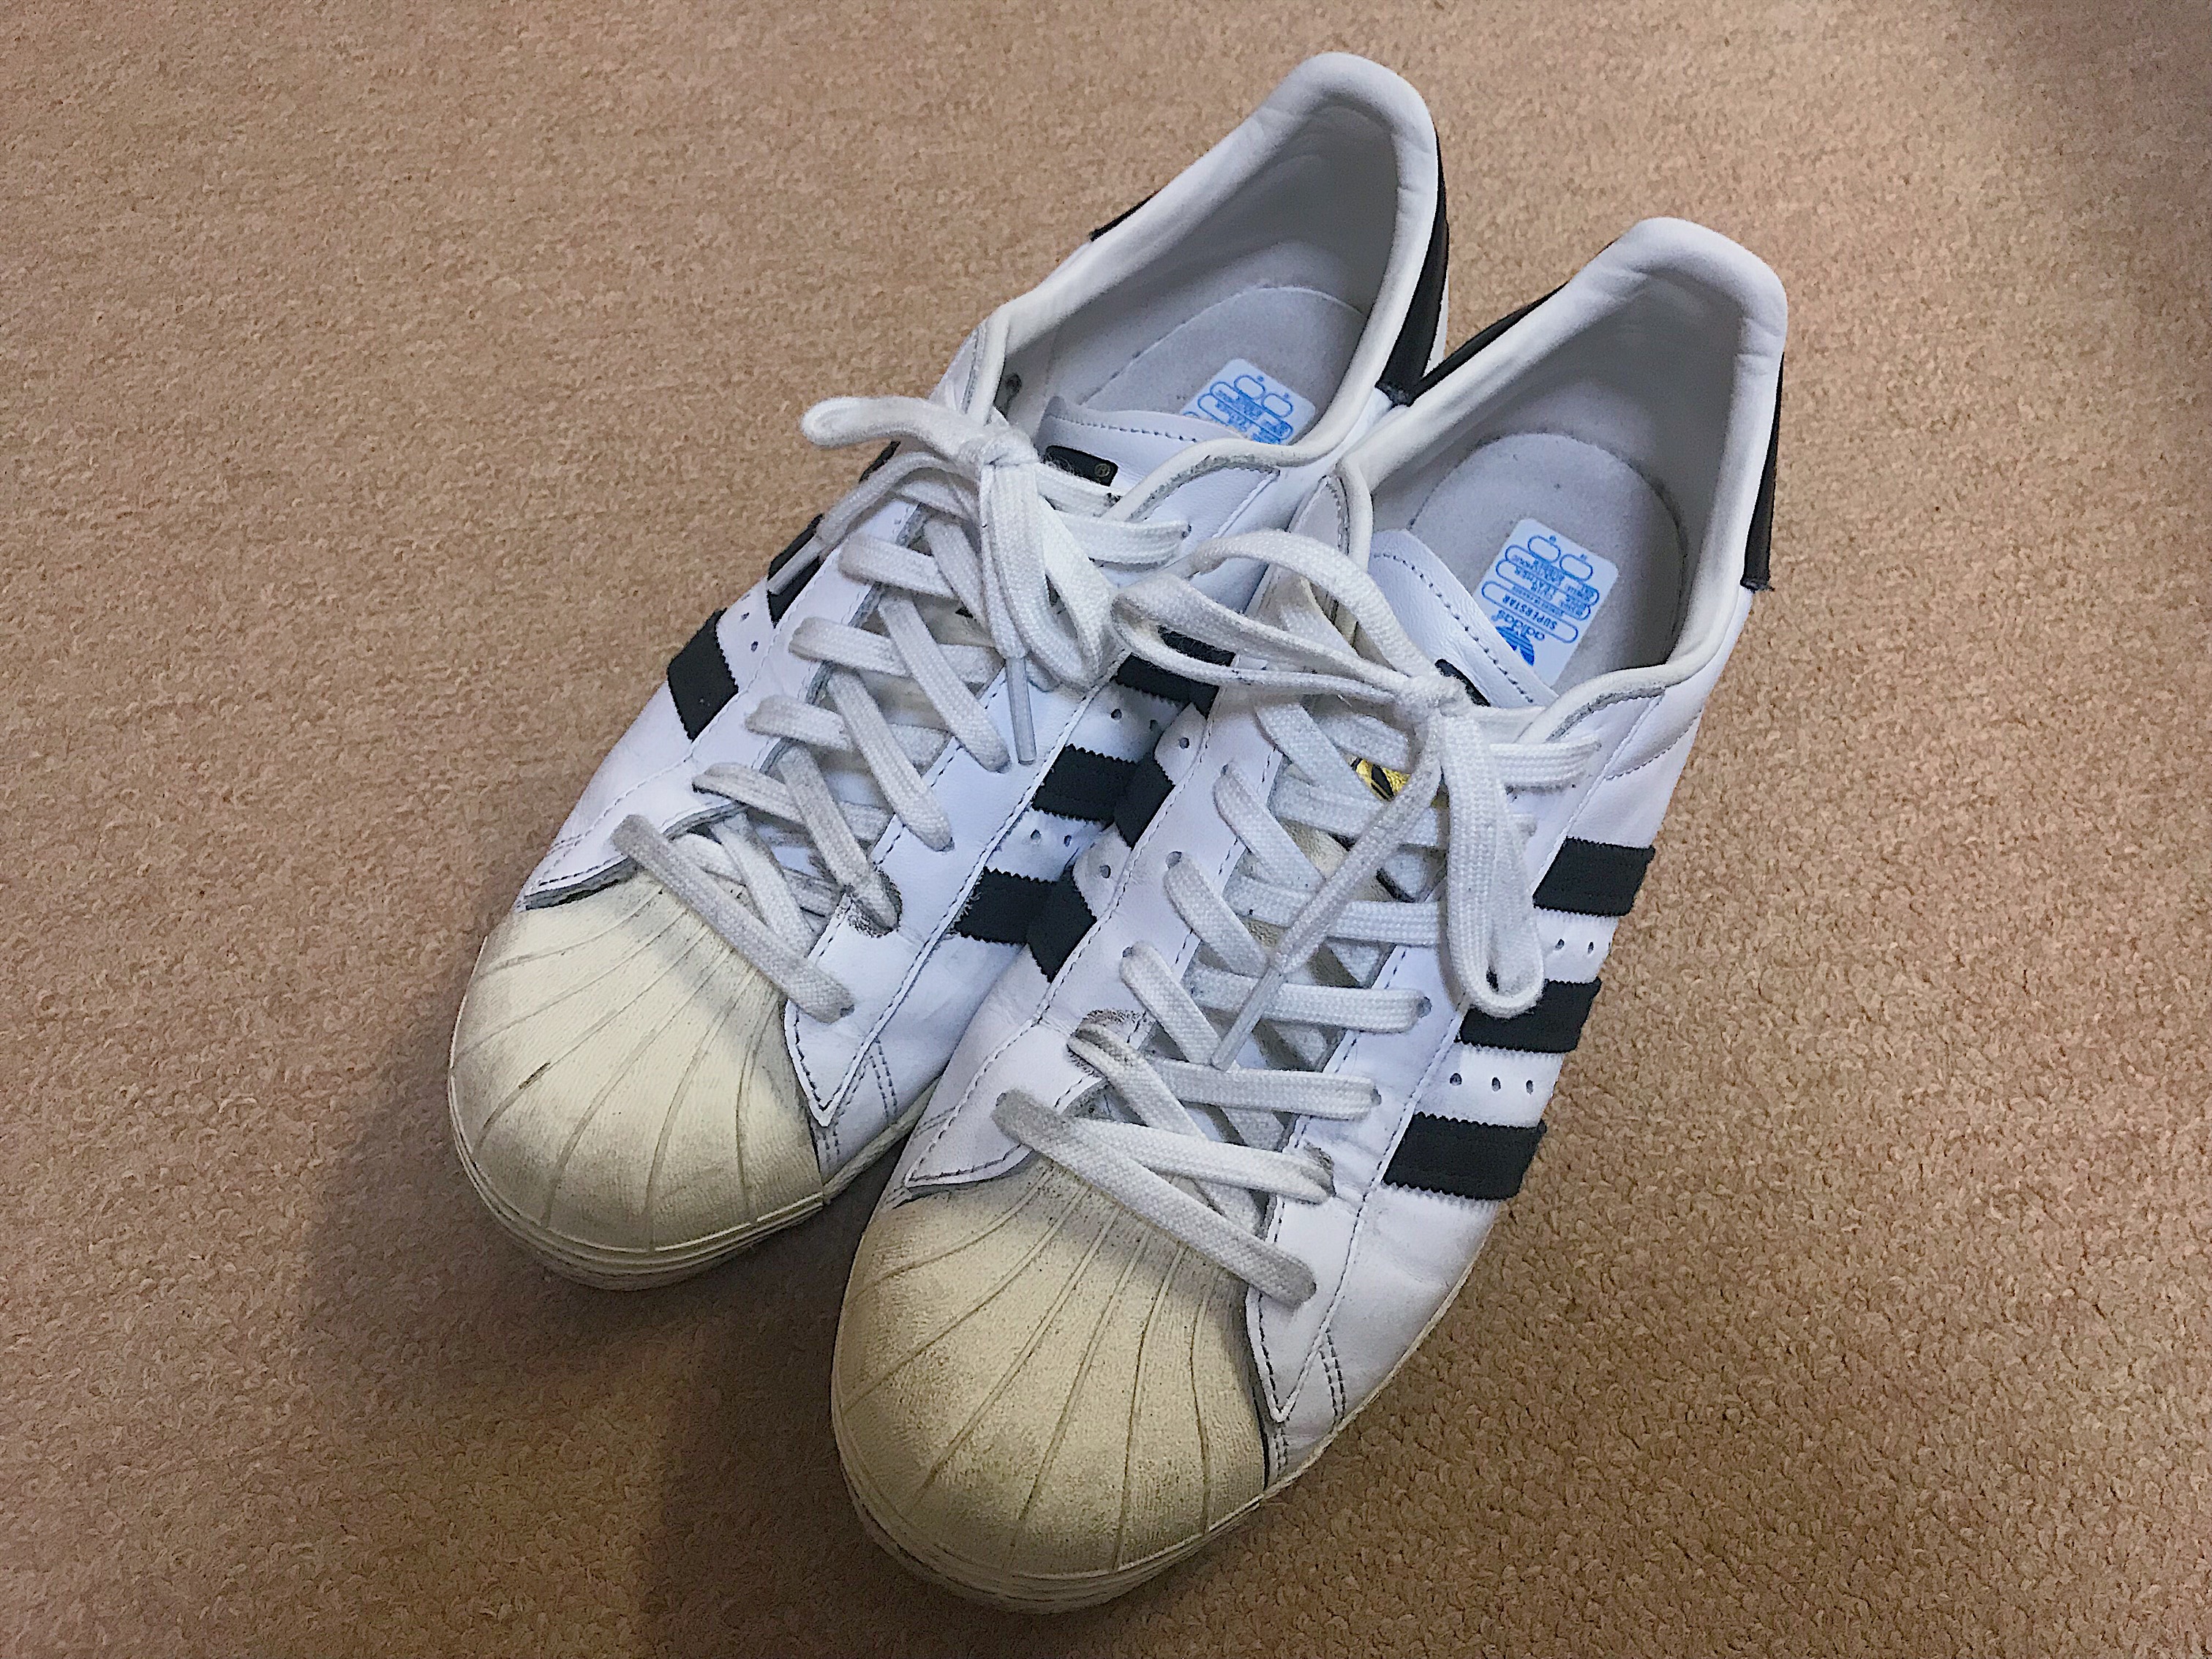 difference between adidas superstar and superstar 80s